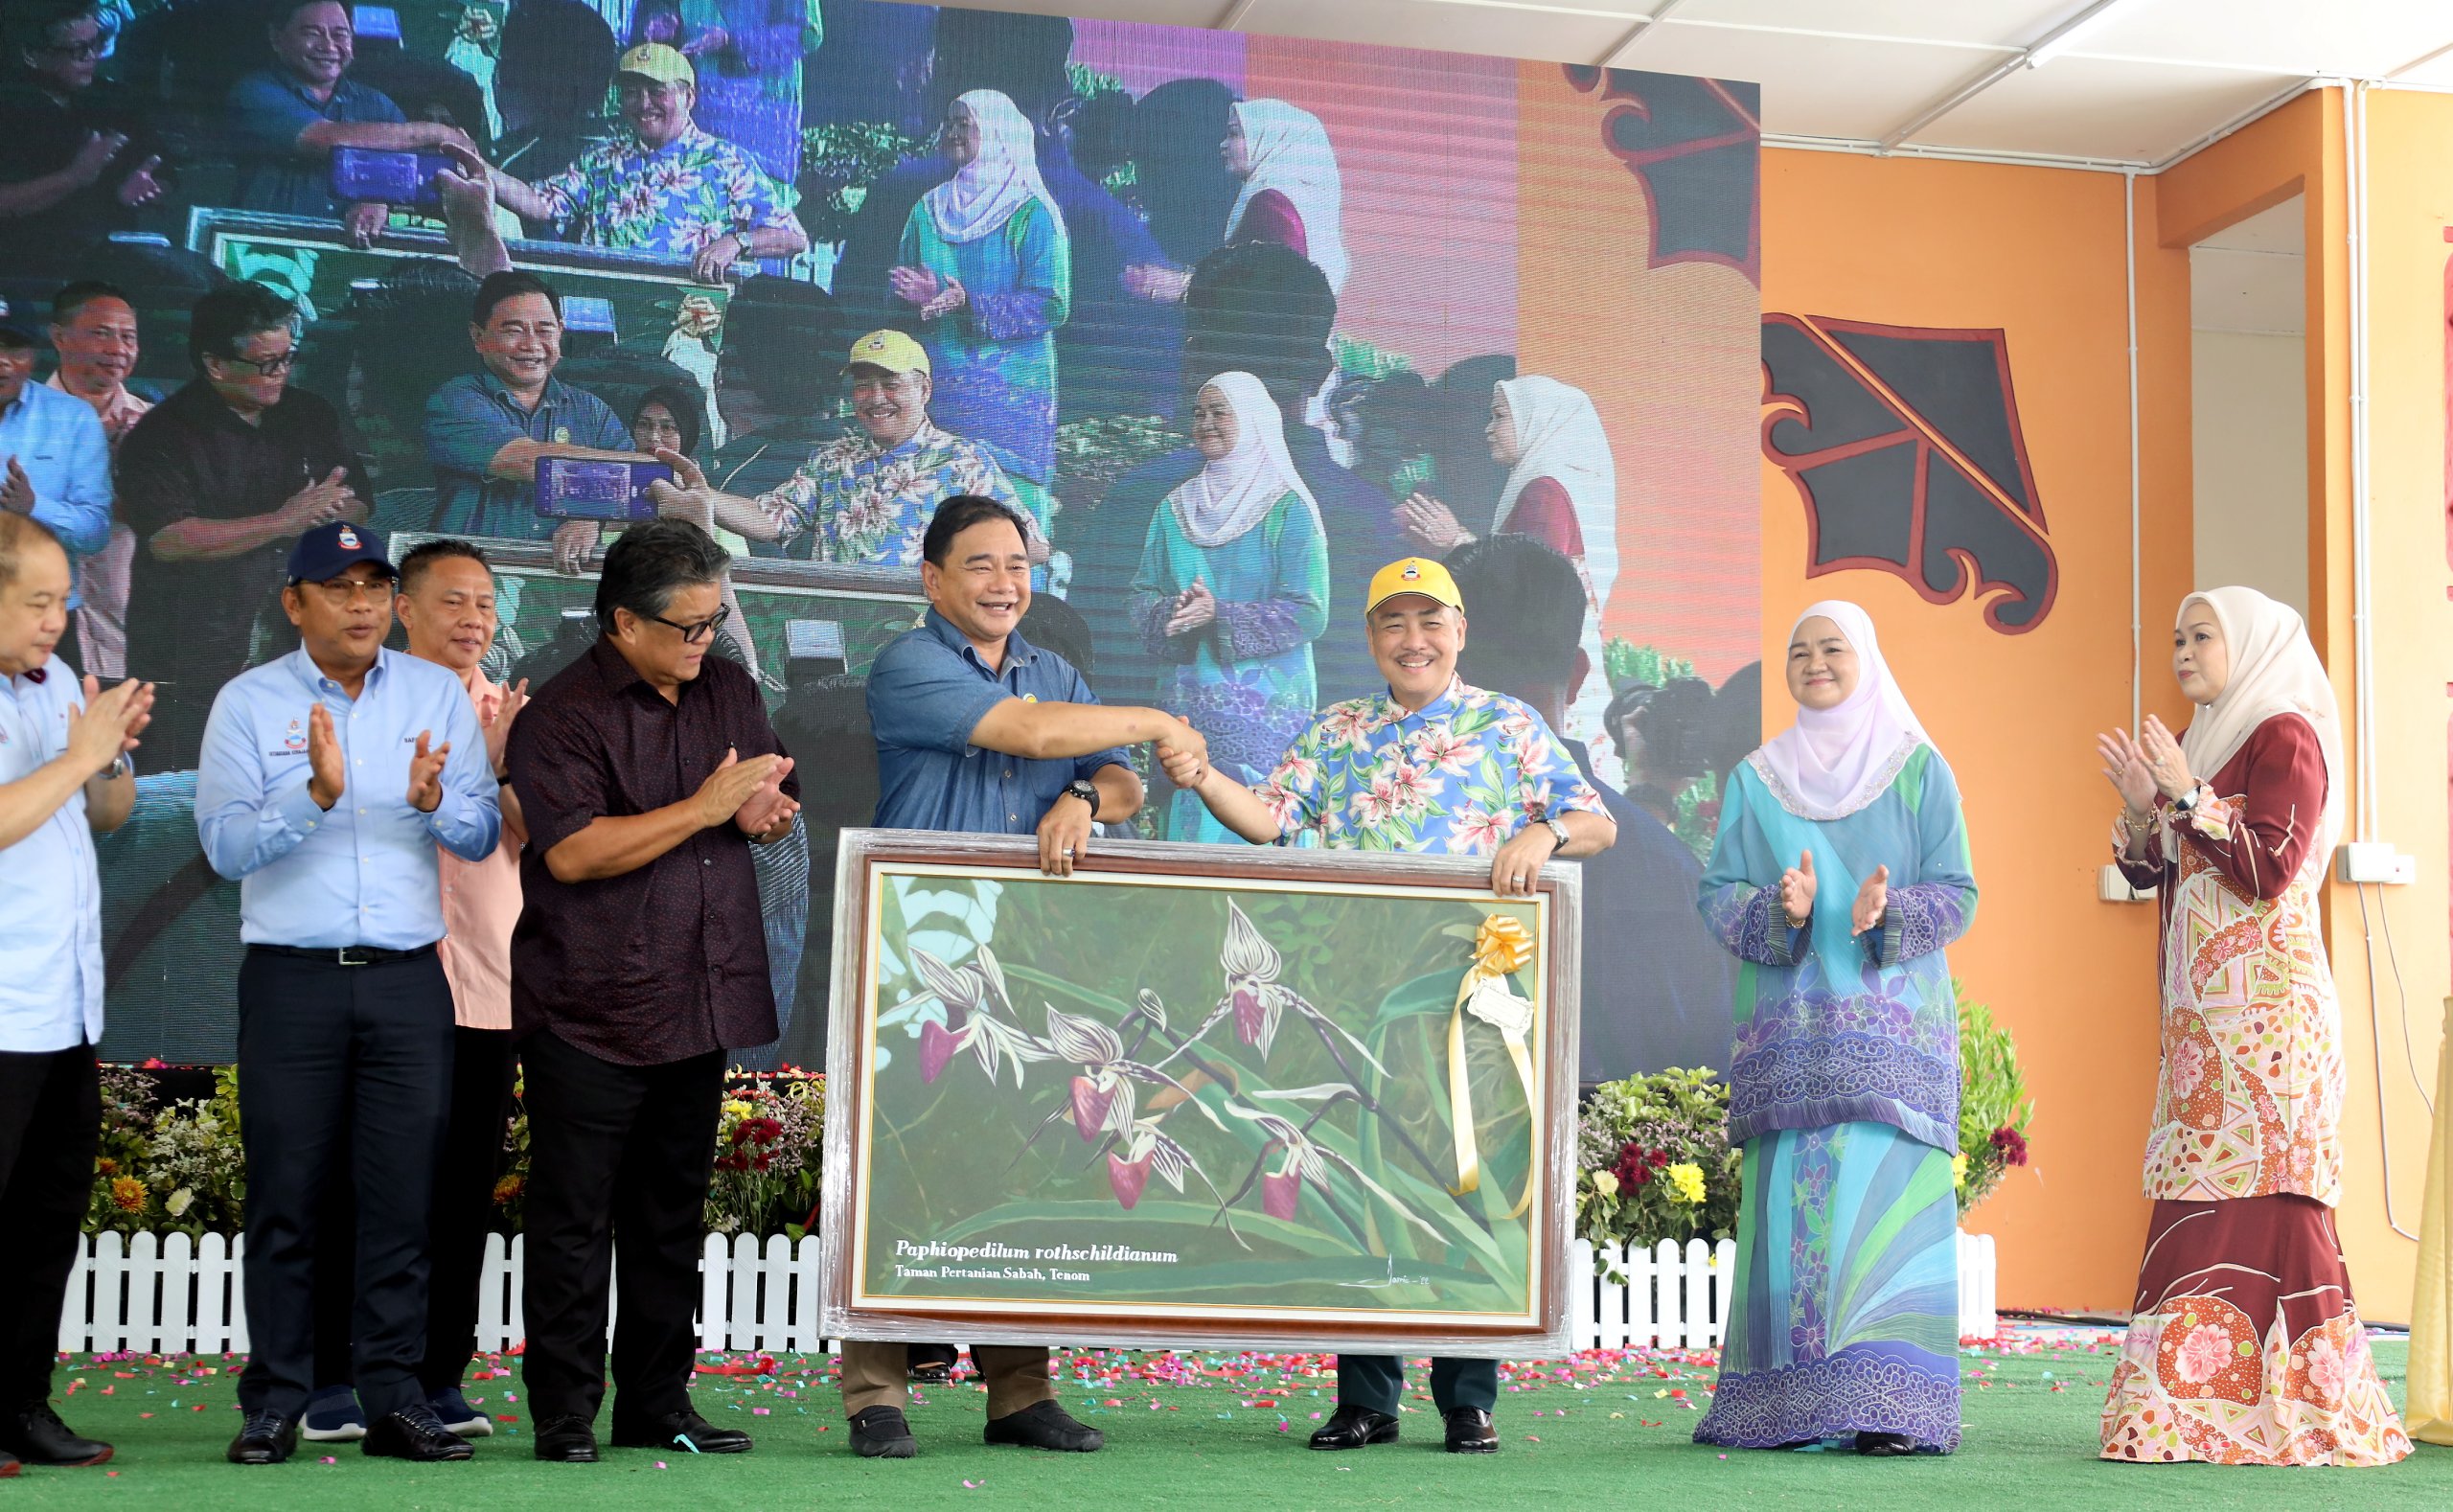 Landscaping, flowers industry has potential in Sabah, says CM